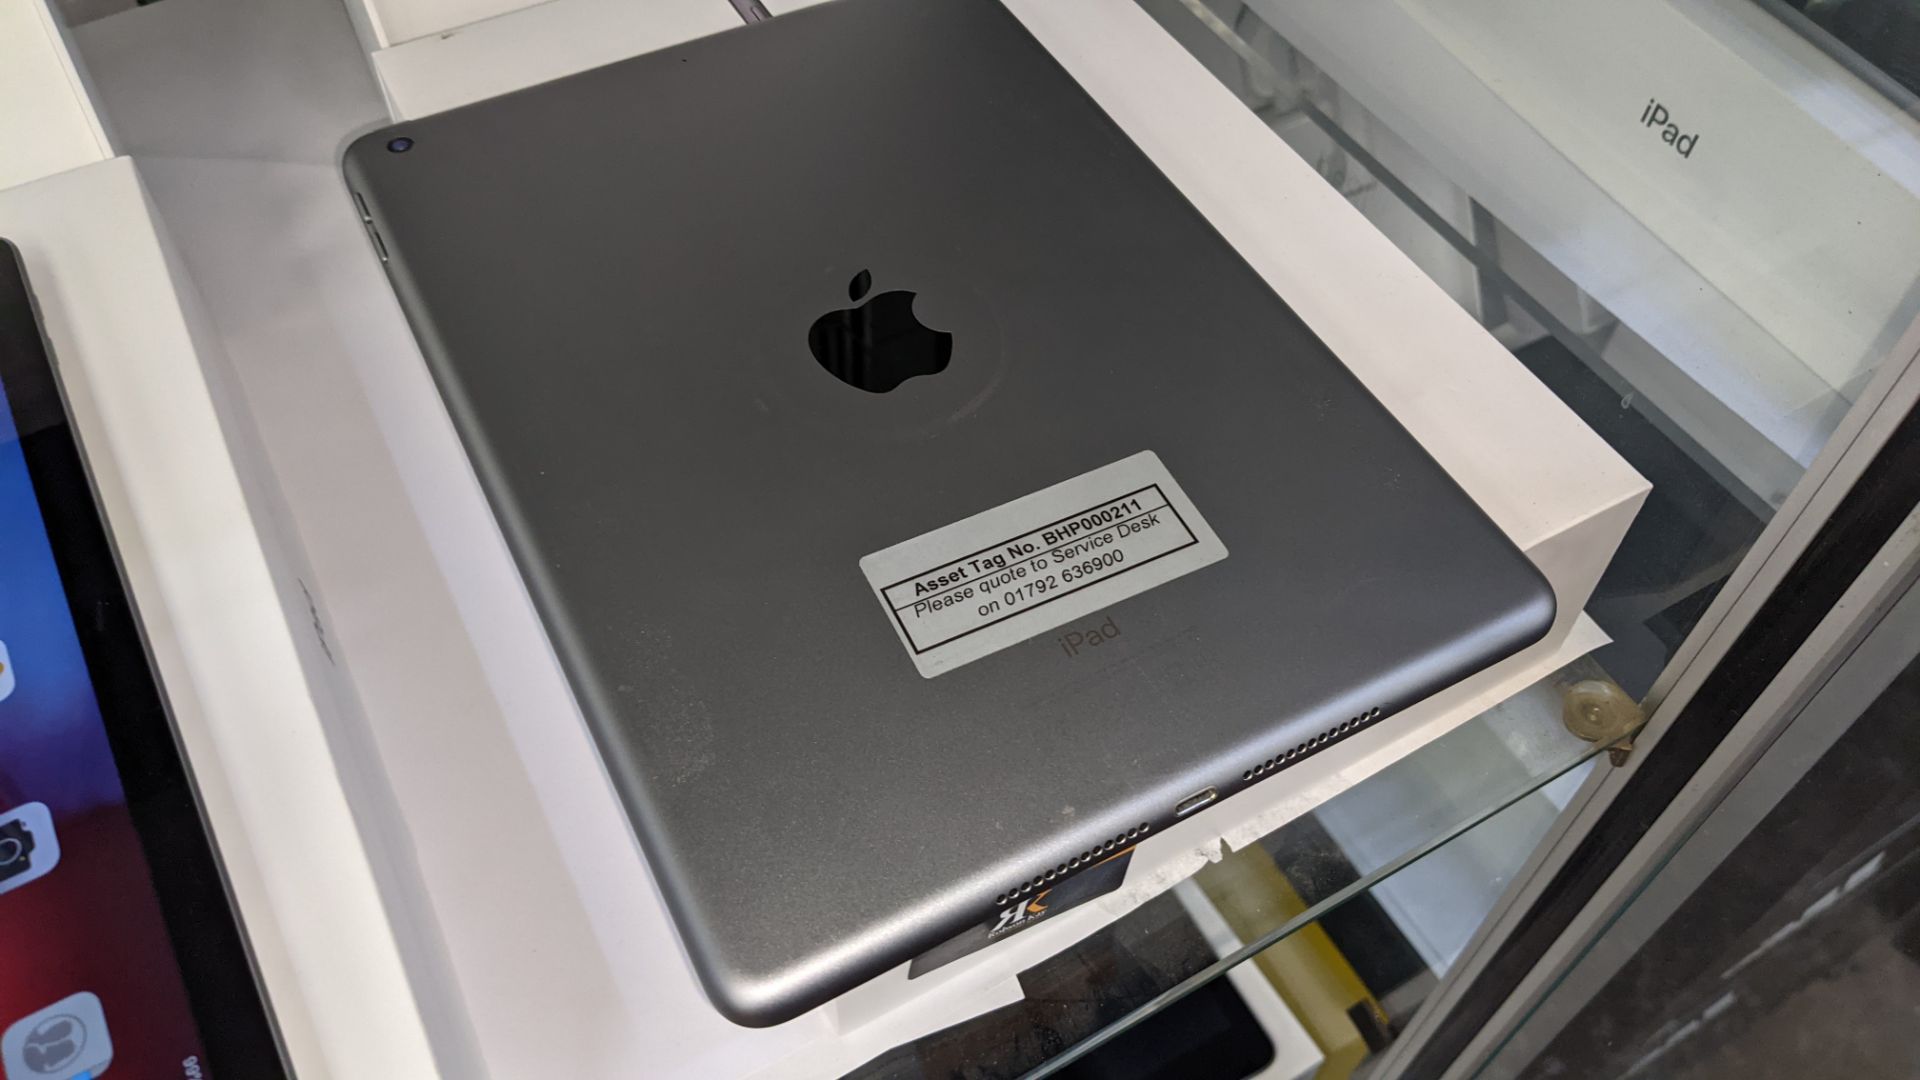 Apple iPad (space grey) 5th generation 32Gb Wi-Fi 9.7" Retina screen. Product code A1822. Apple A9 - Image 9 of 10